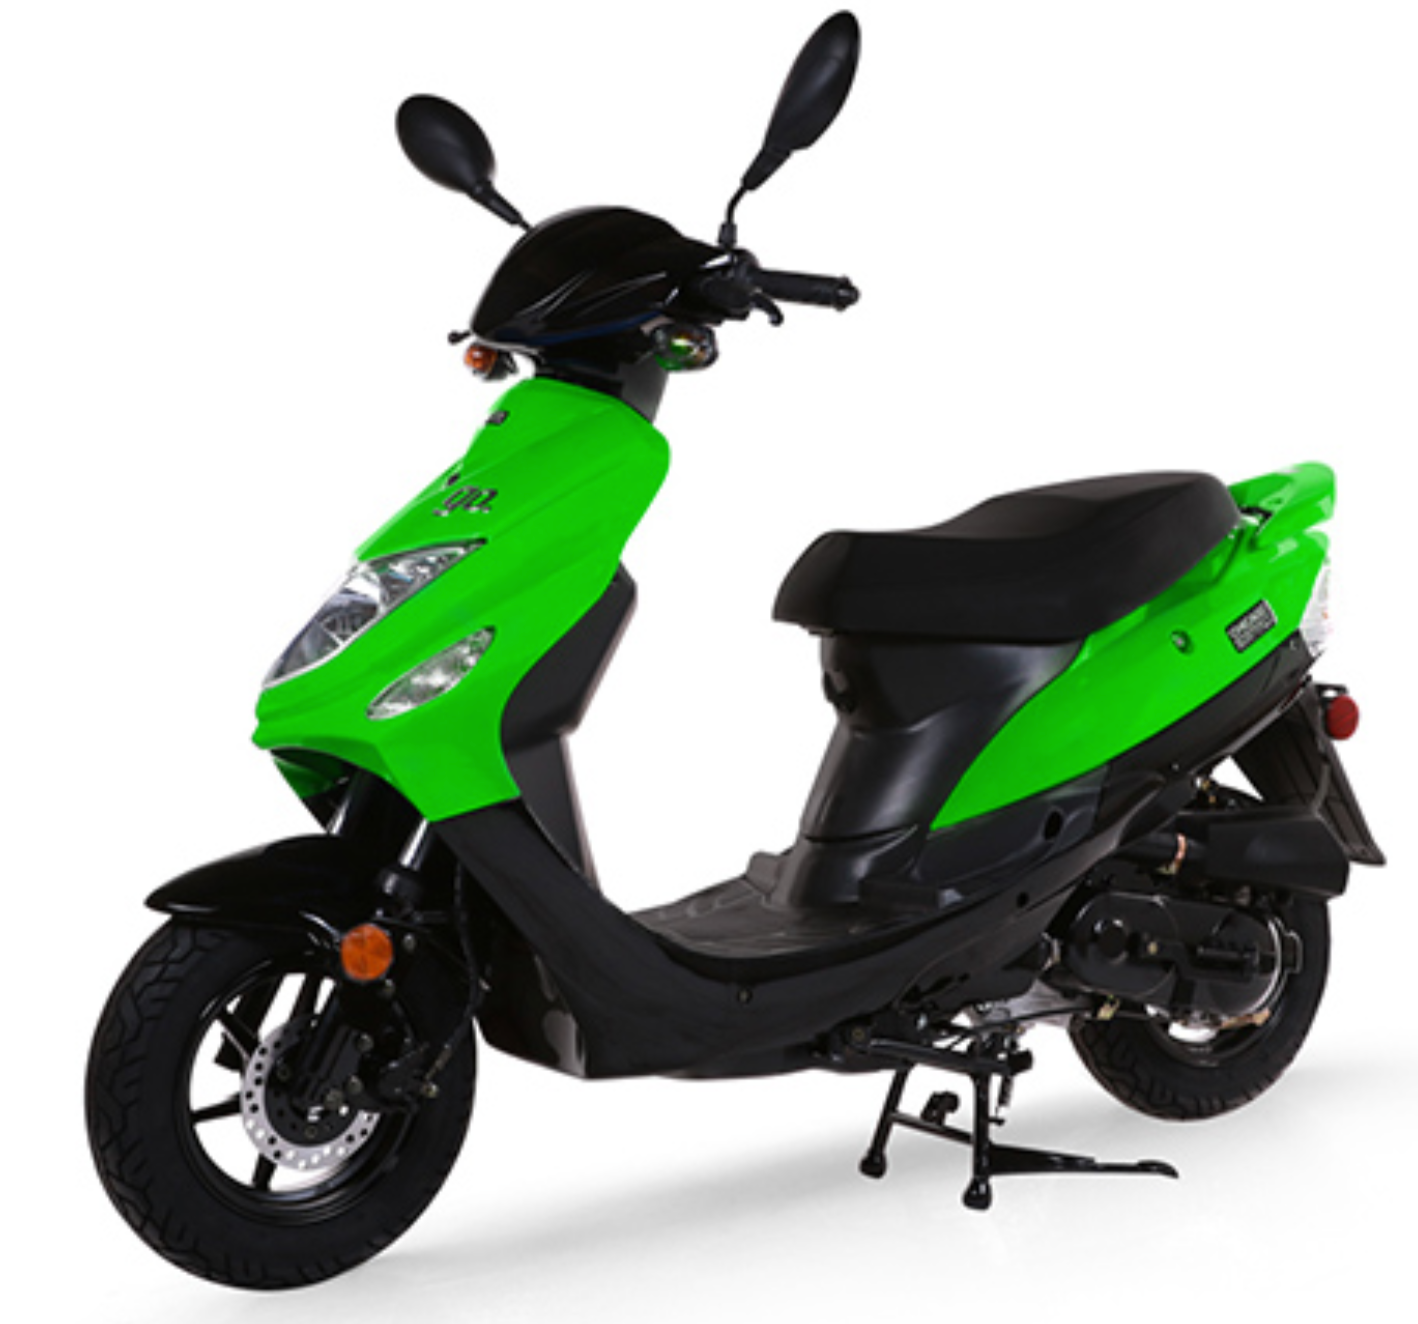 Wolf Islander 50cc Scooter For Sale  We Deliver Anywhere – SCOOTERSTOP.com